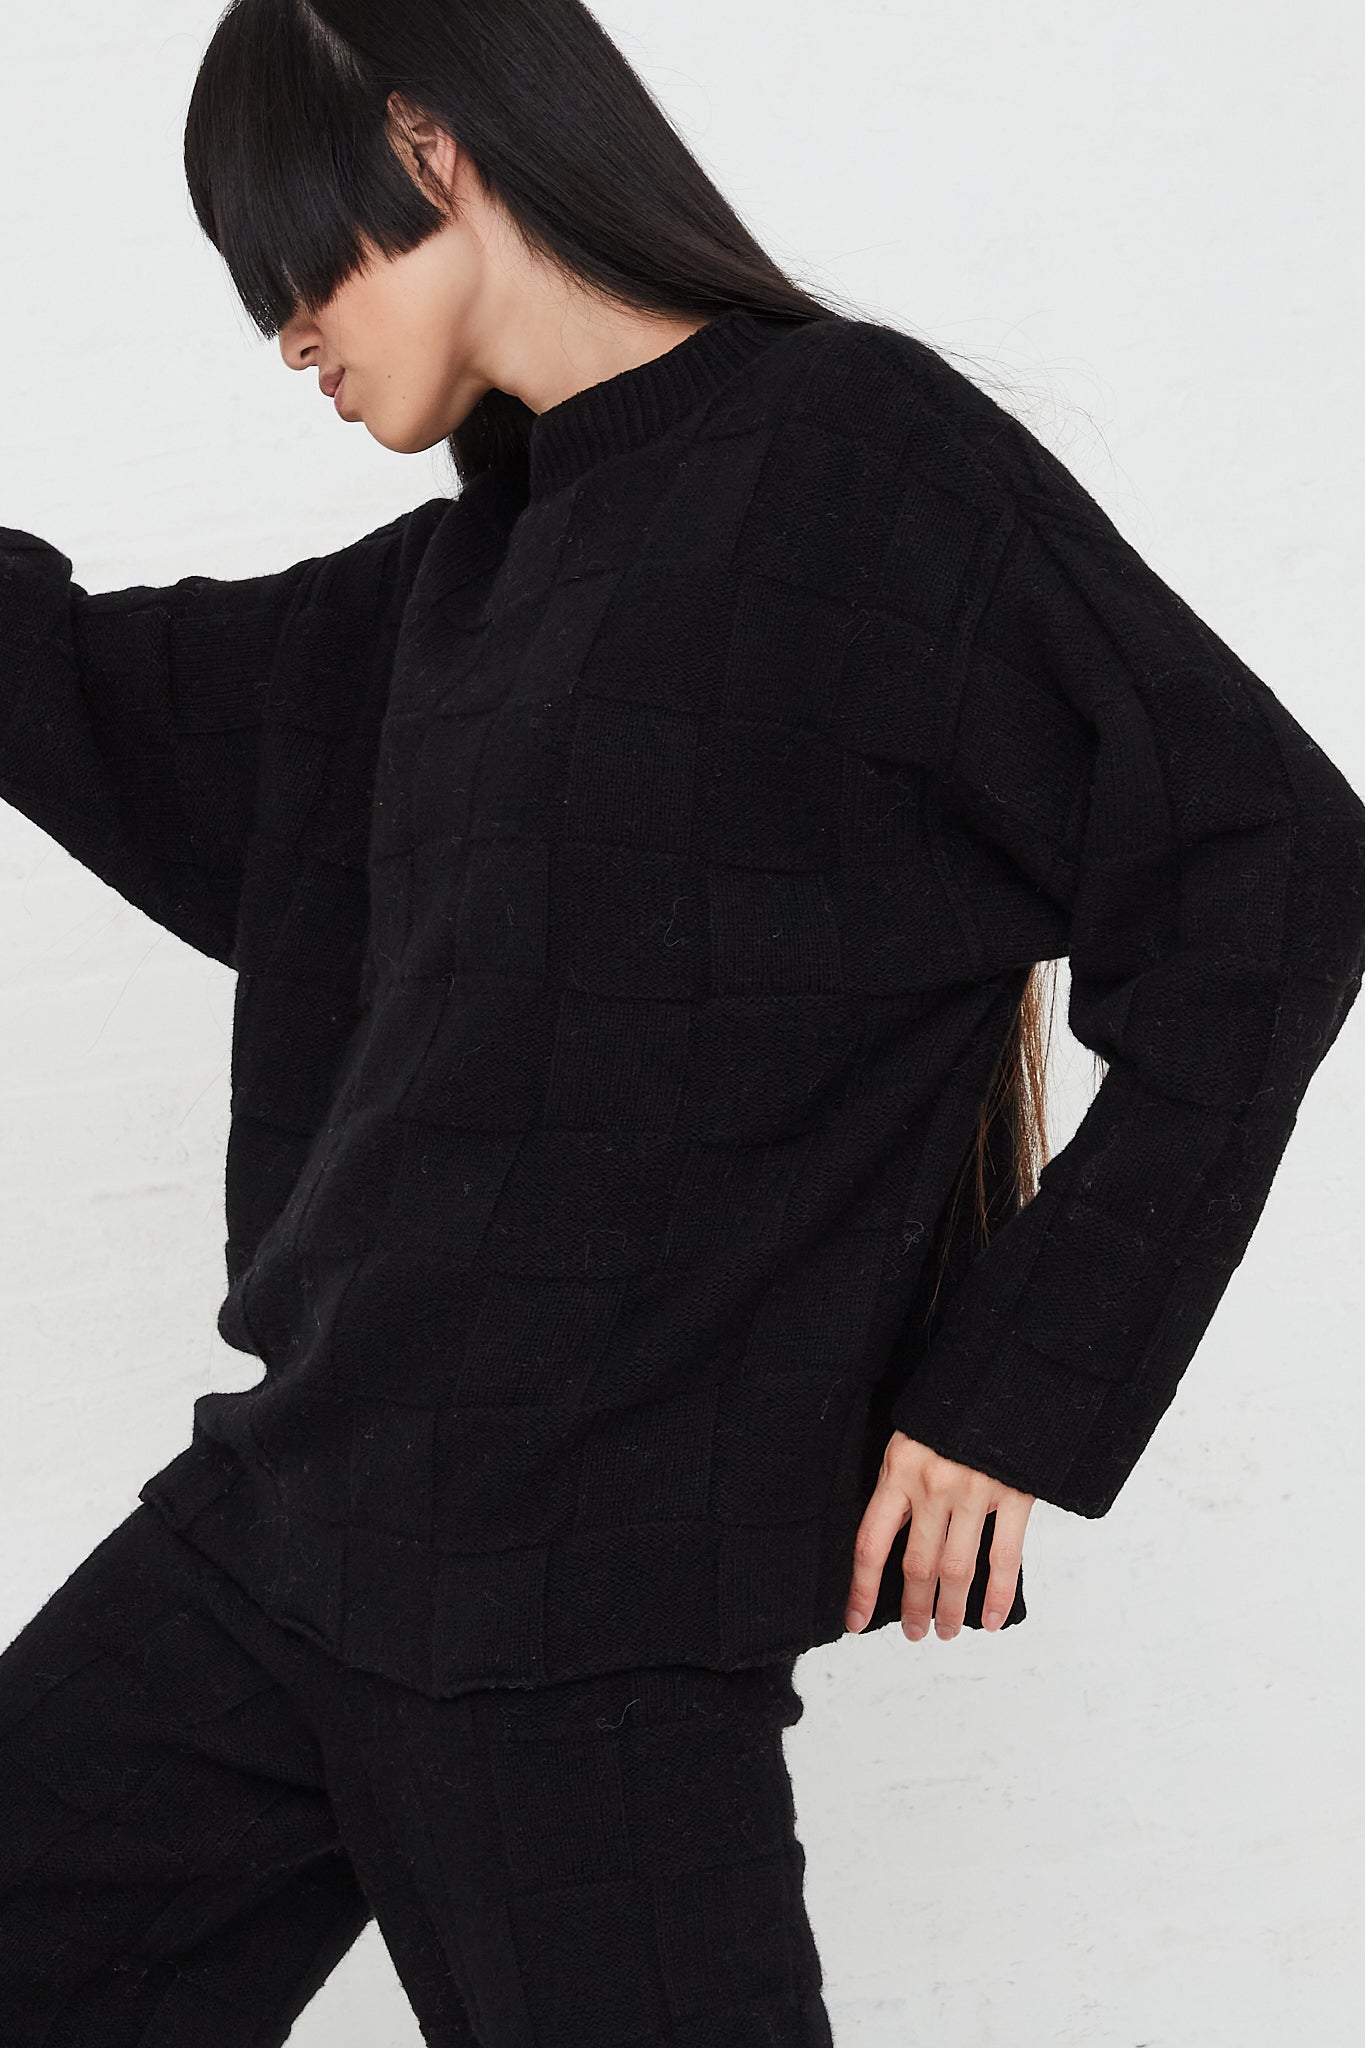 Konak Knit Sweater in Black by Baserange for Oroboro Front Sideview